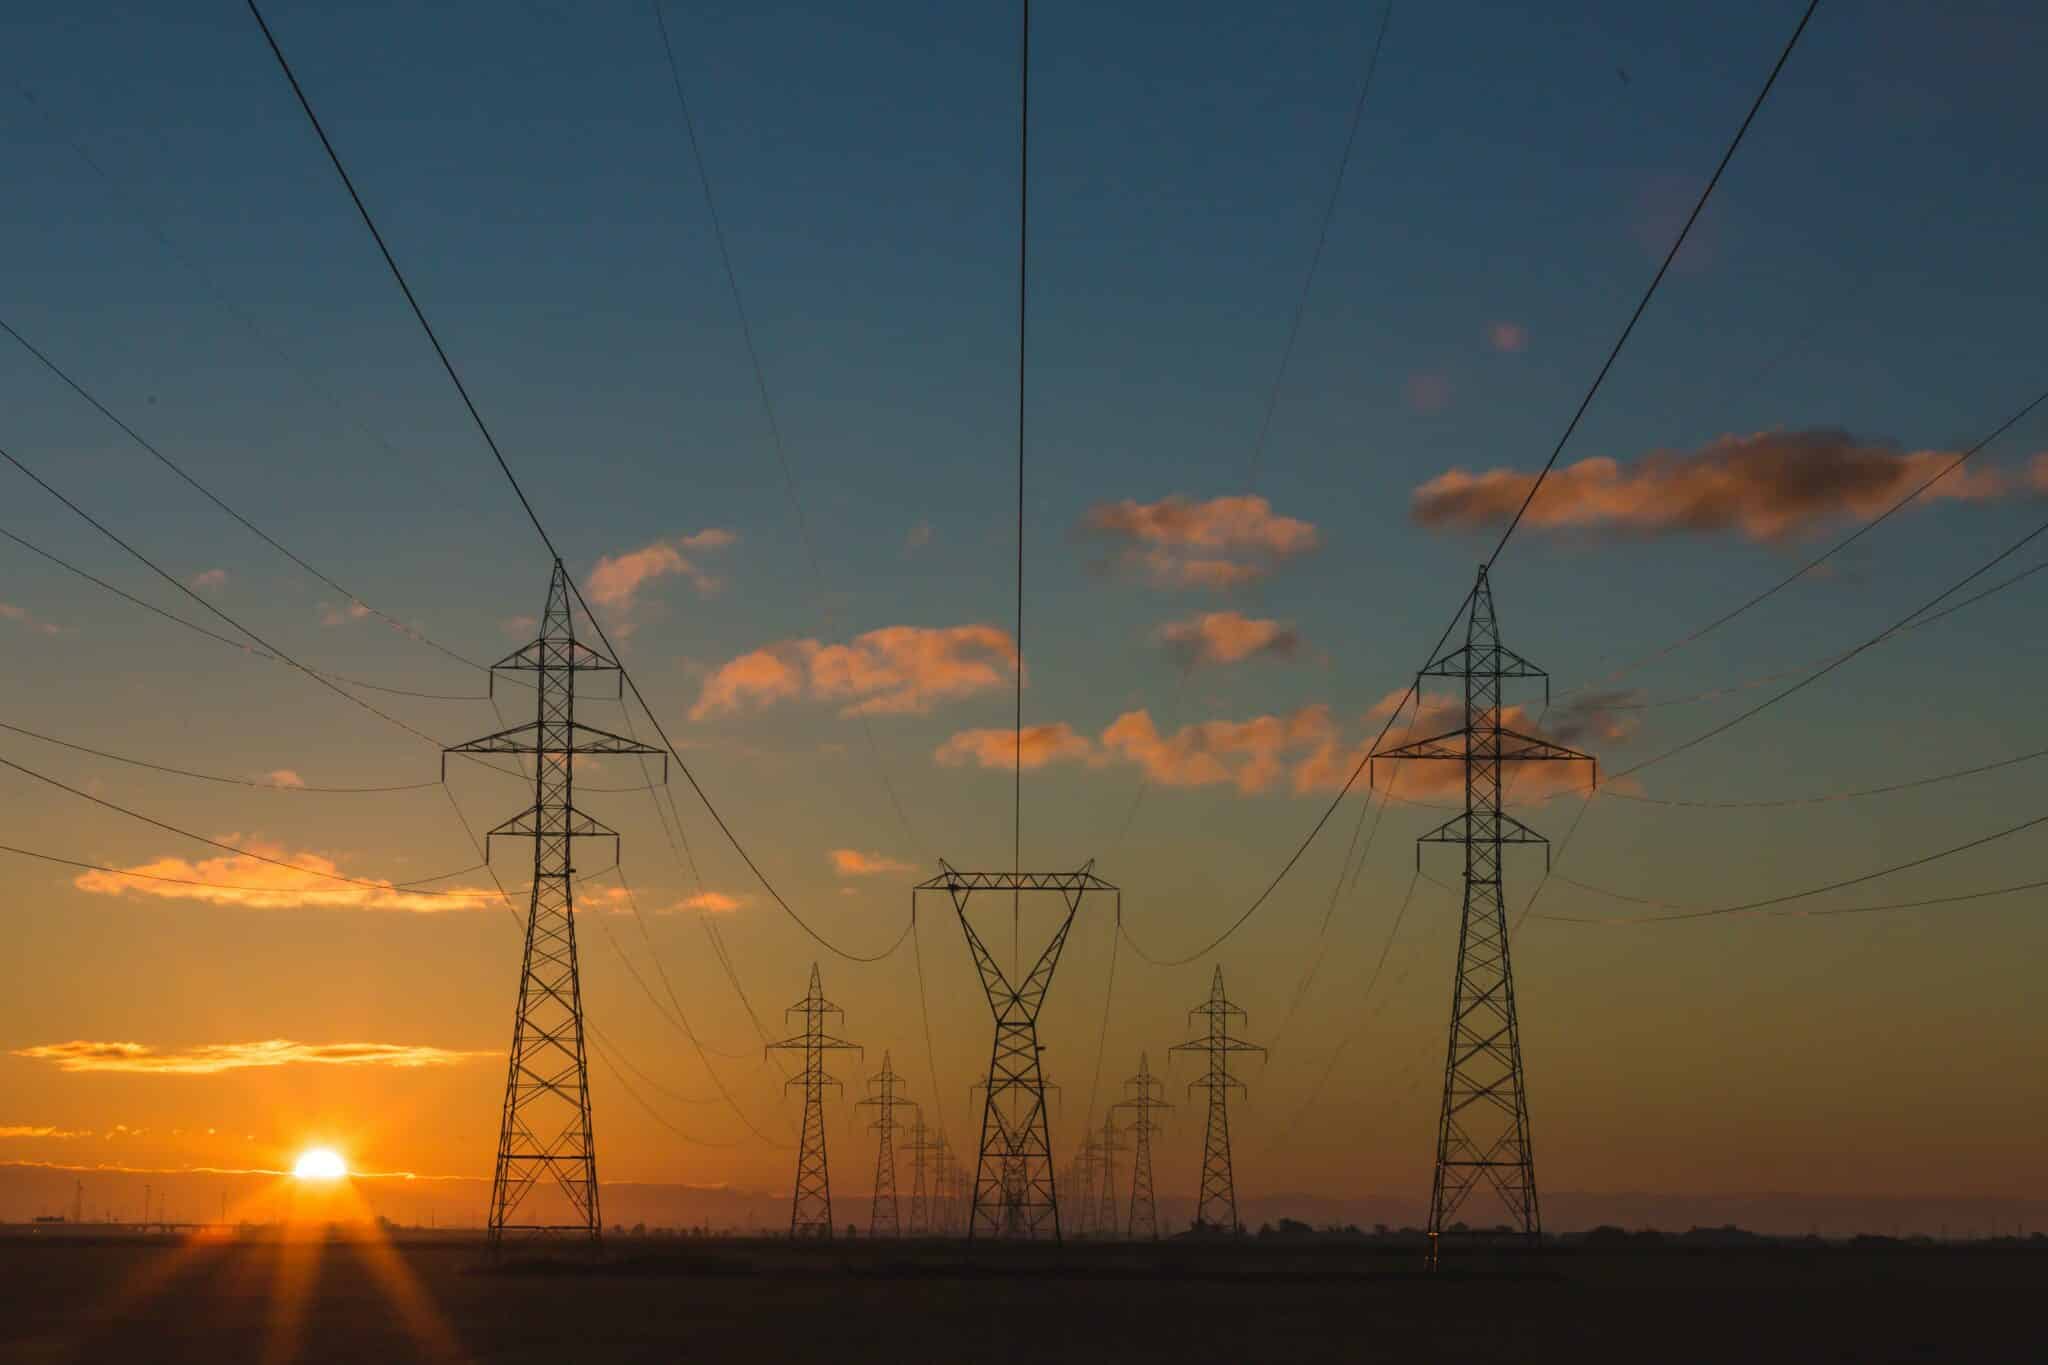 Distributed generation: the strategy in Brazil